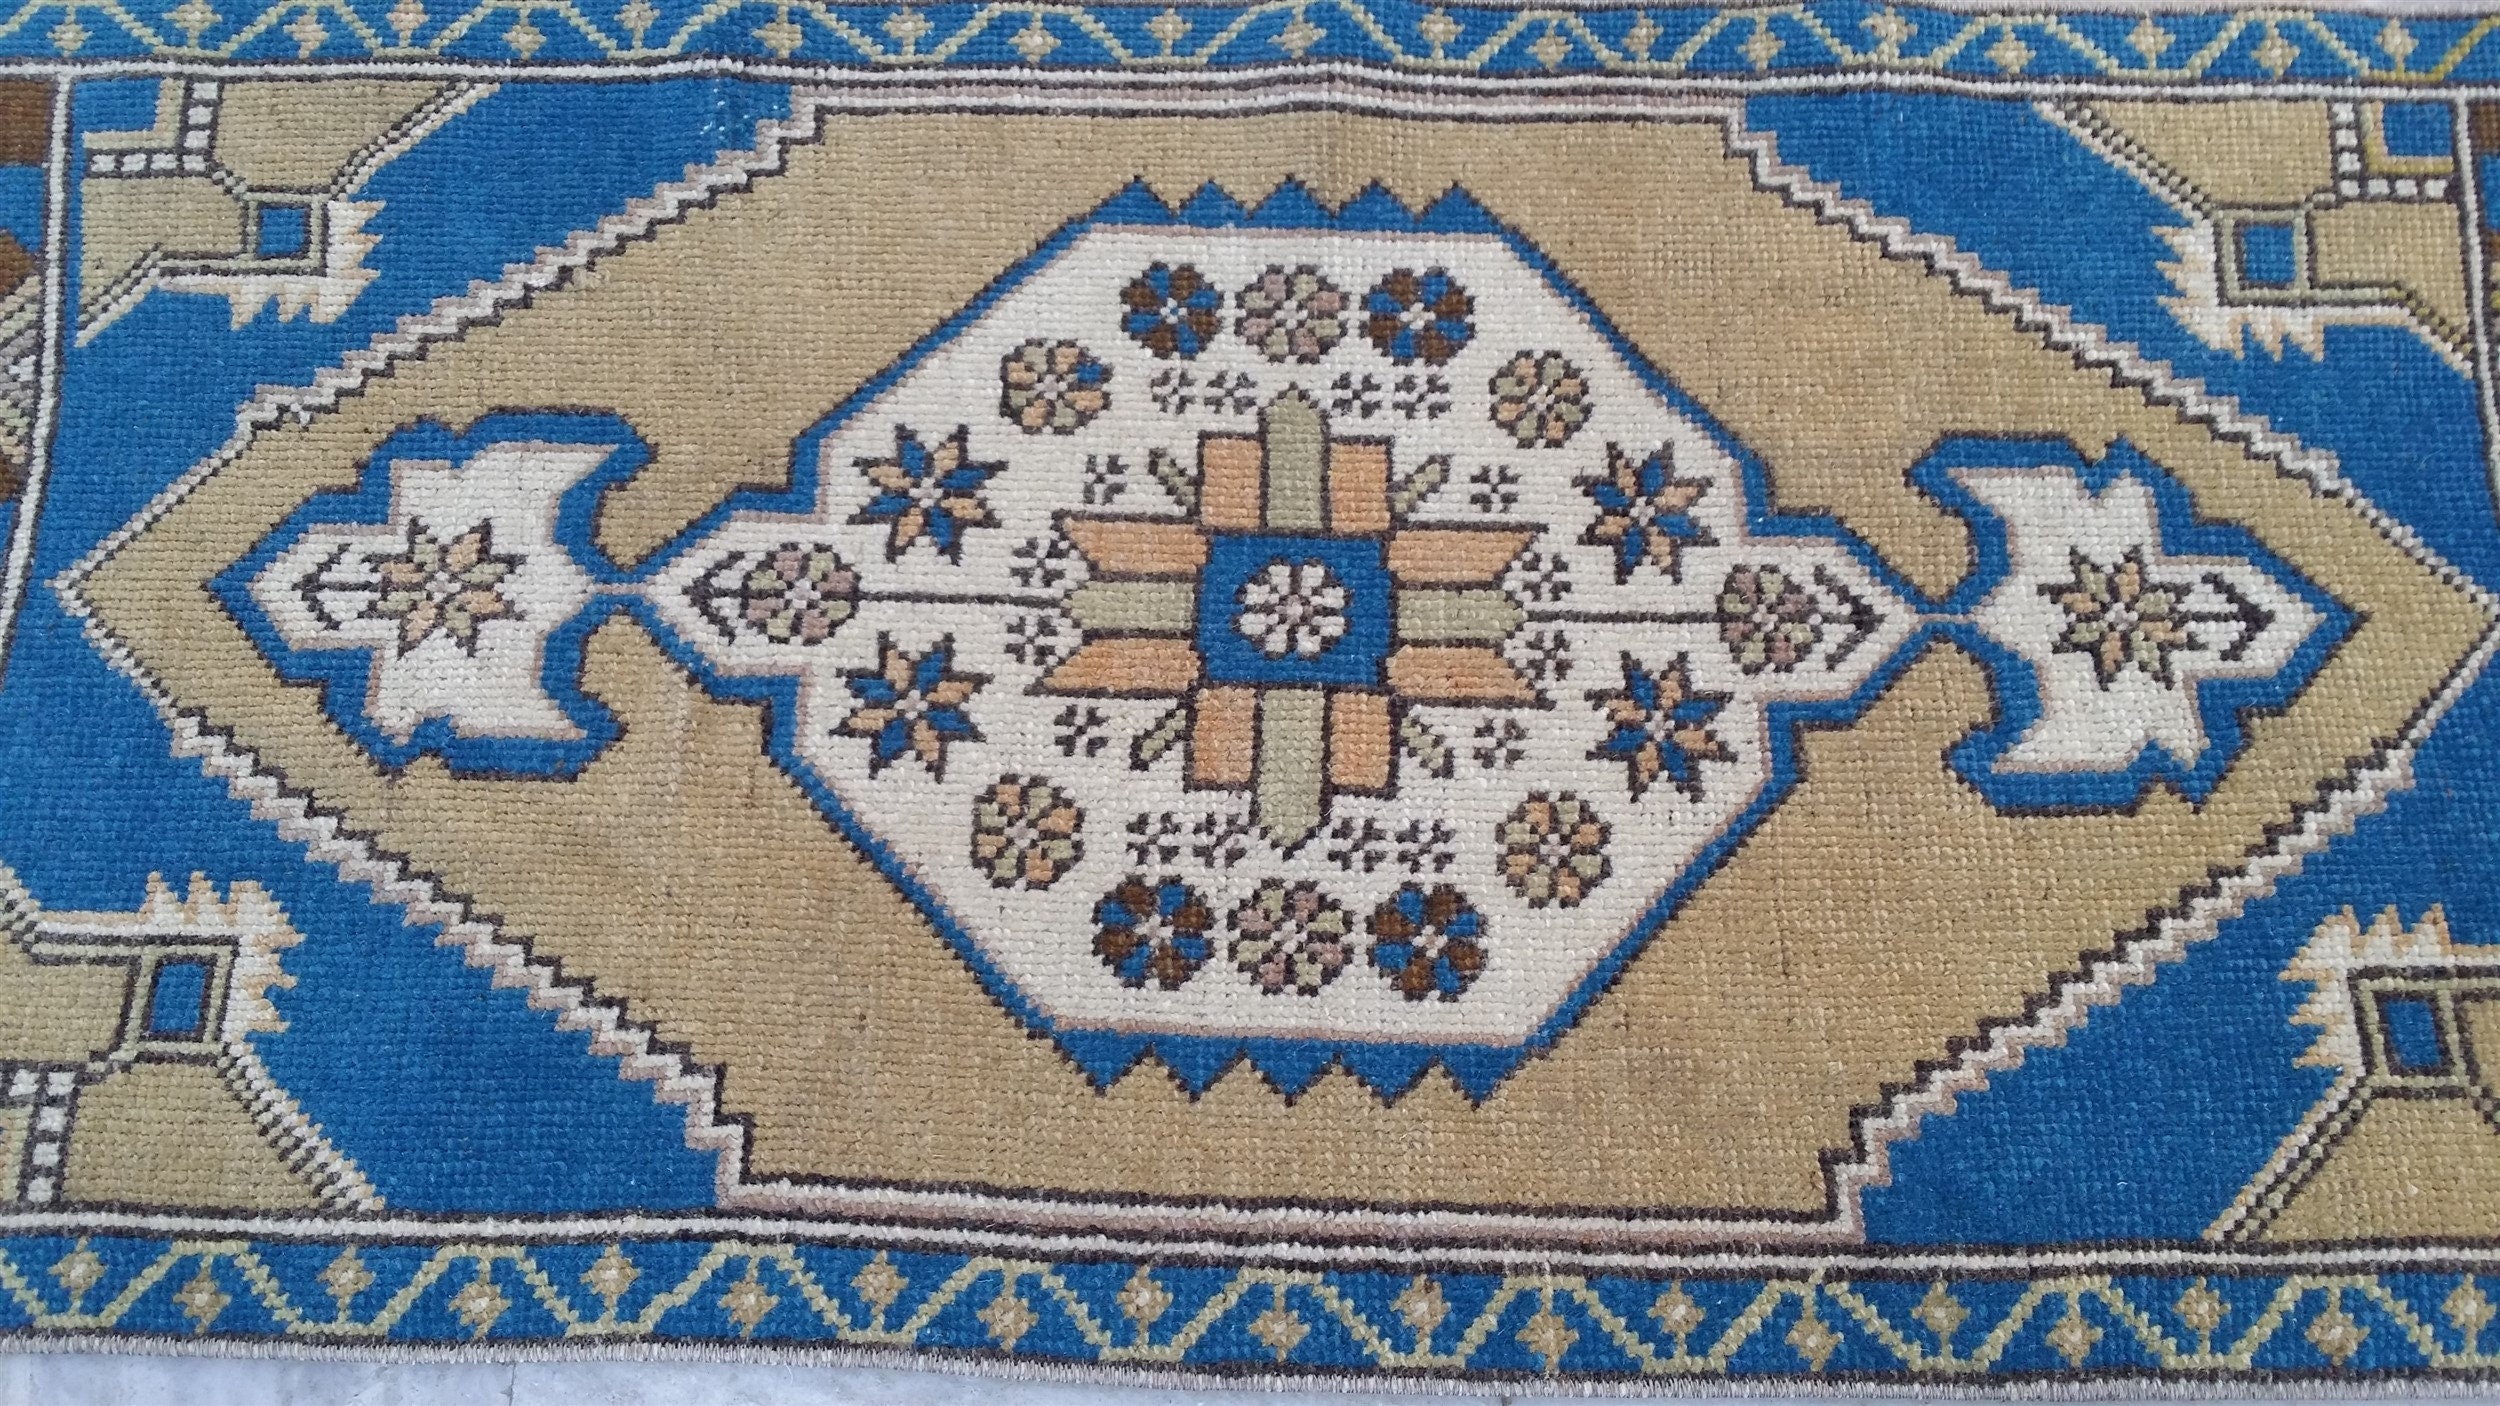 Small Turkish Rug 3 ft 7 in x 1 ft 6 in, Distressed, Antique Wash Vintage Mat